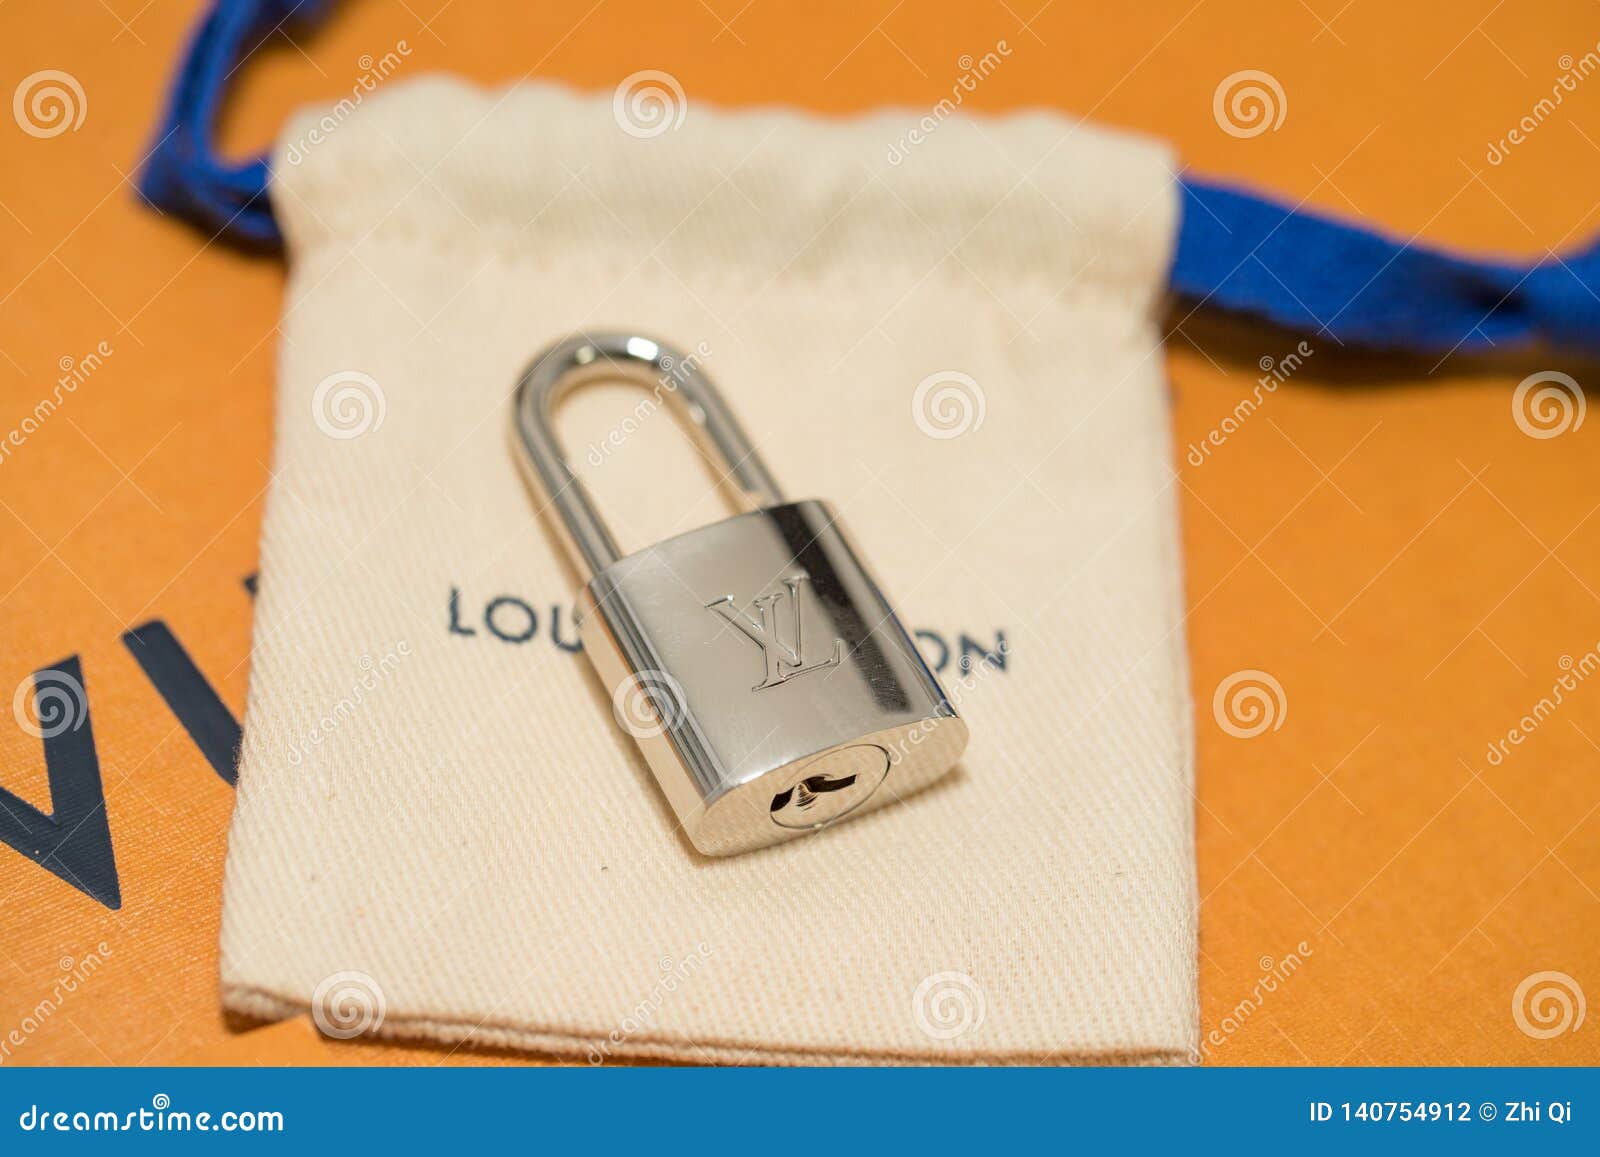 Louis Vuitton Lock on the Table. Editorial Photography - Image of metal,  linda: 140754912